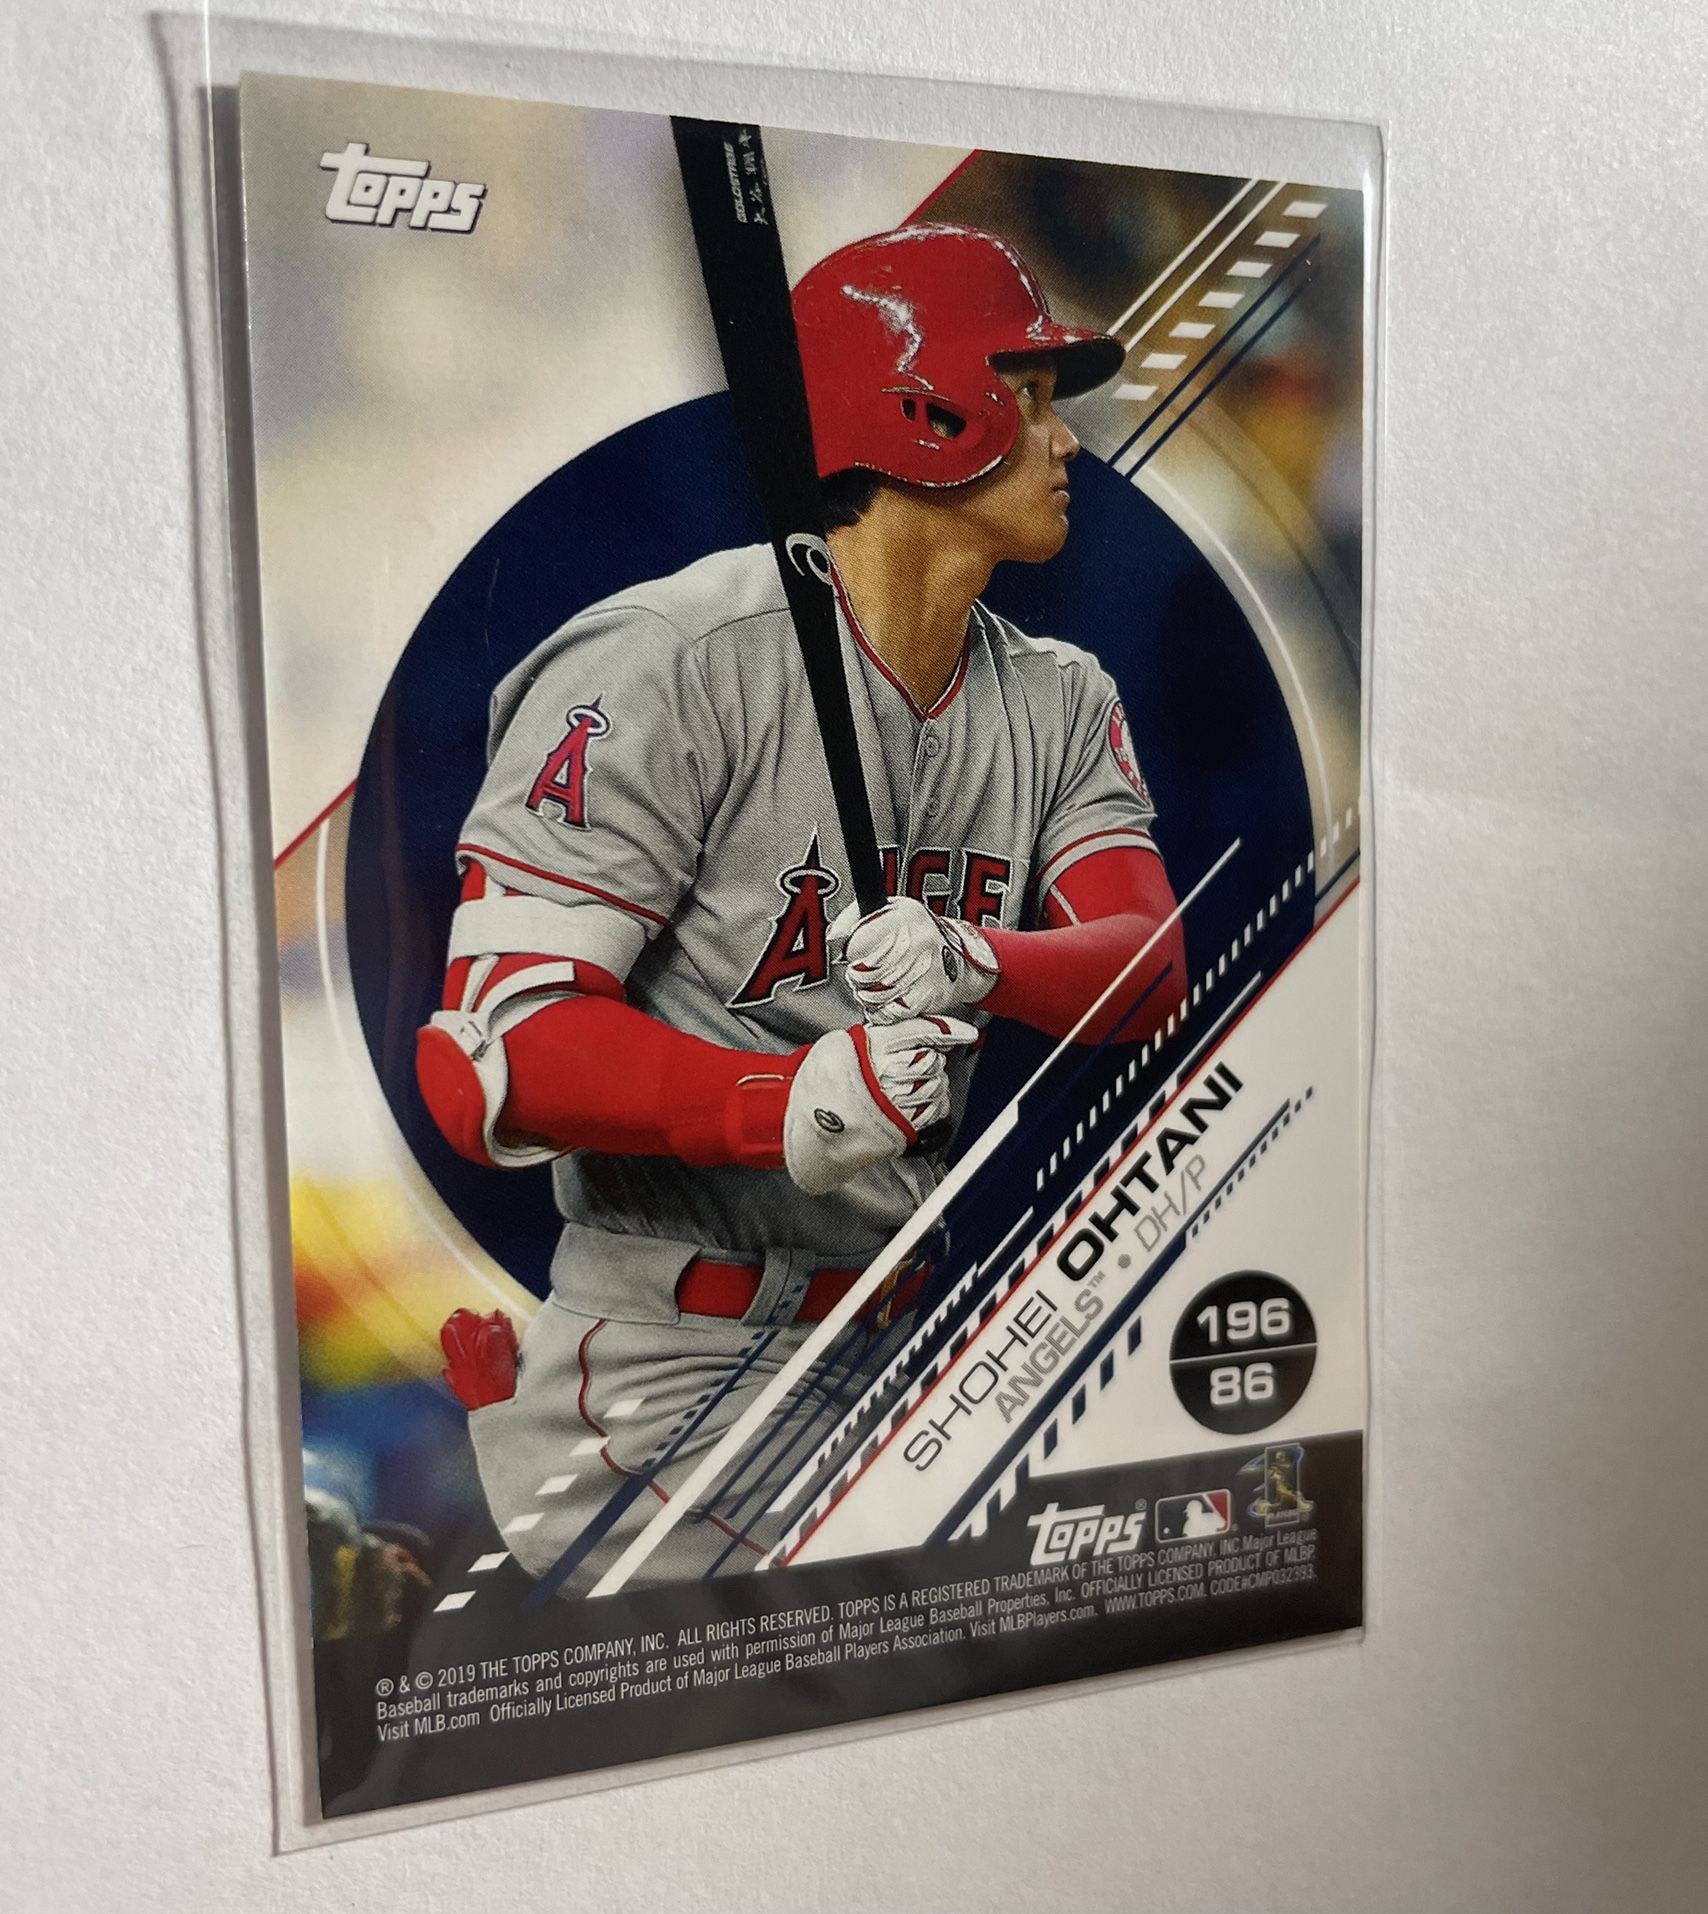 Rare Mint 2019 Topps MLB Baseball Sticker Card Collection Shohei Ohtani  Los Angeles Angels and Cy Young Award #196 